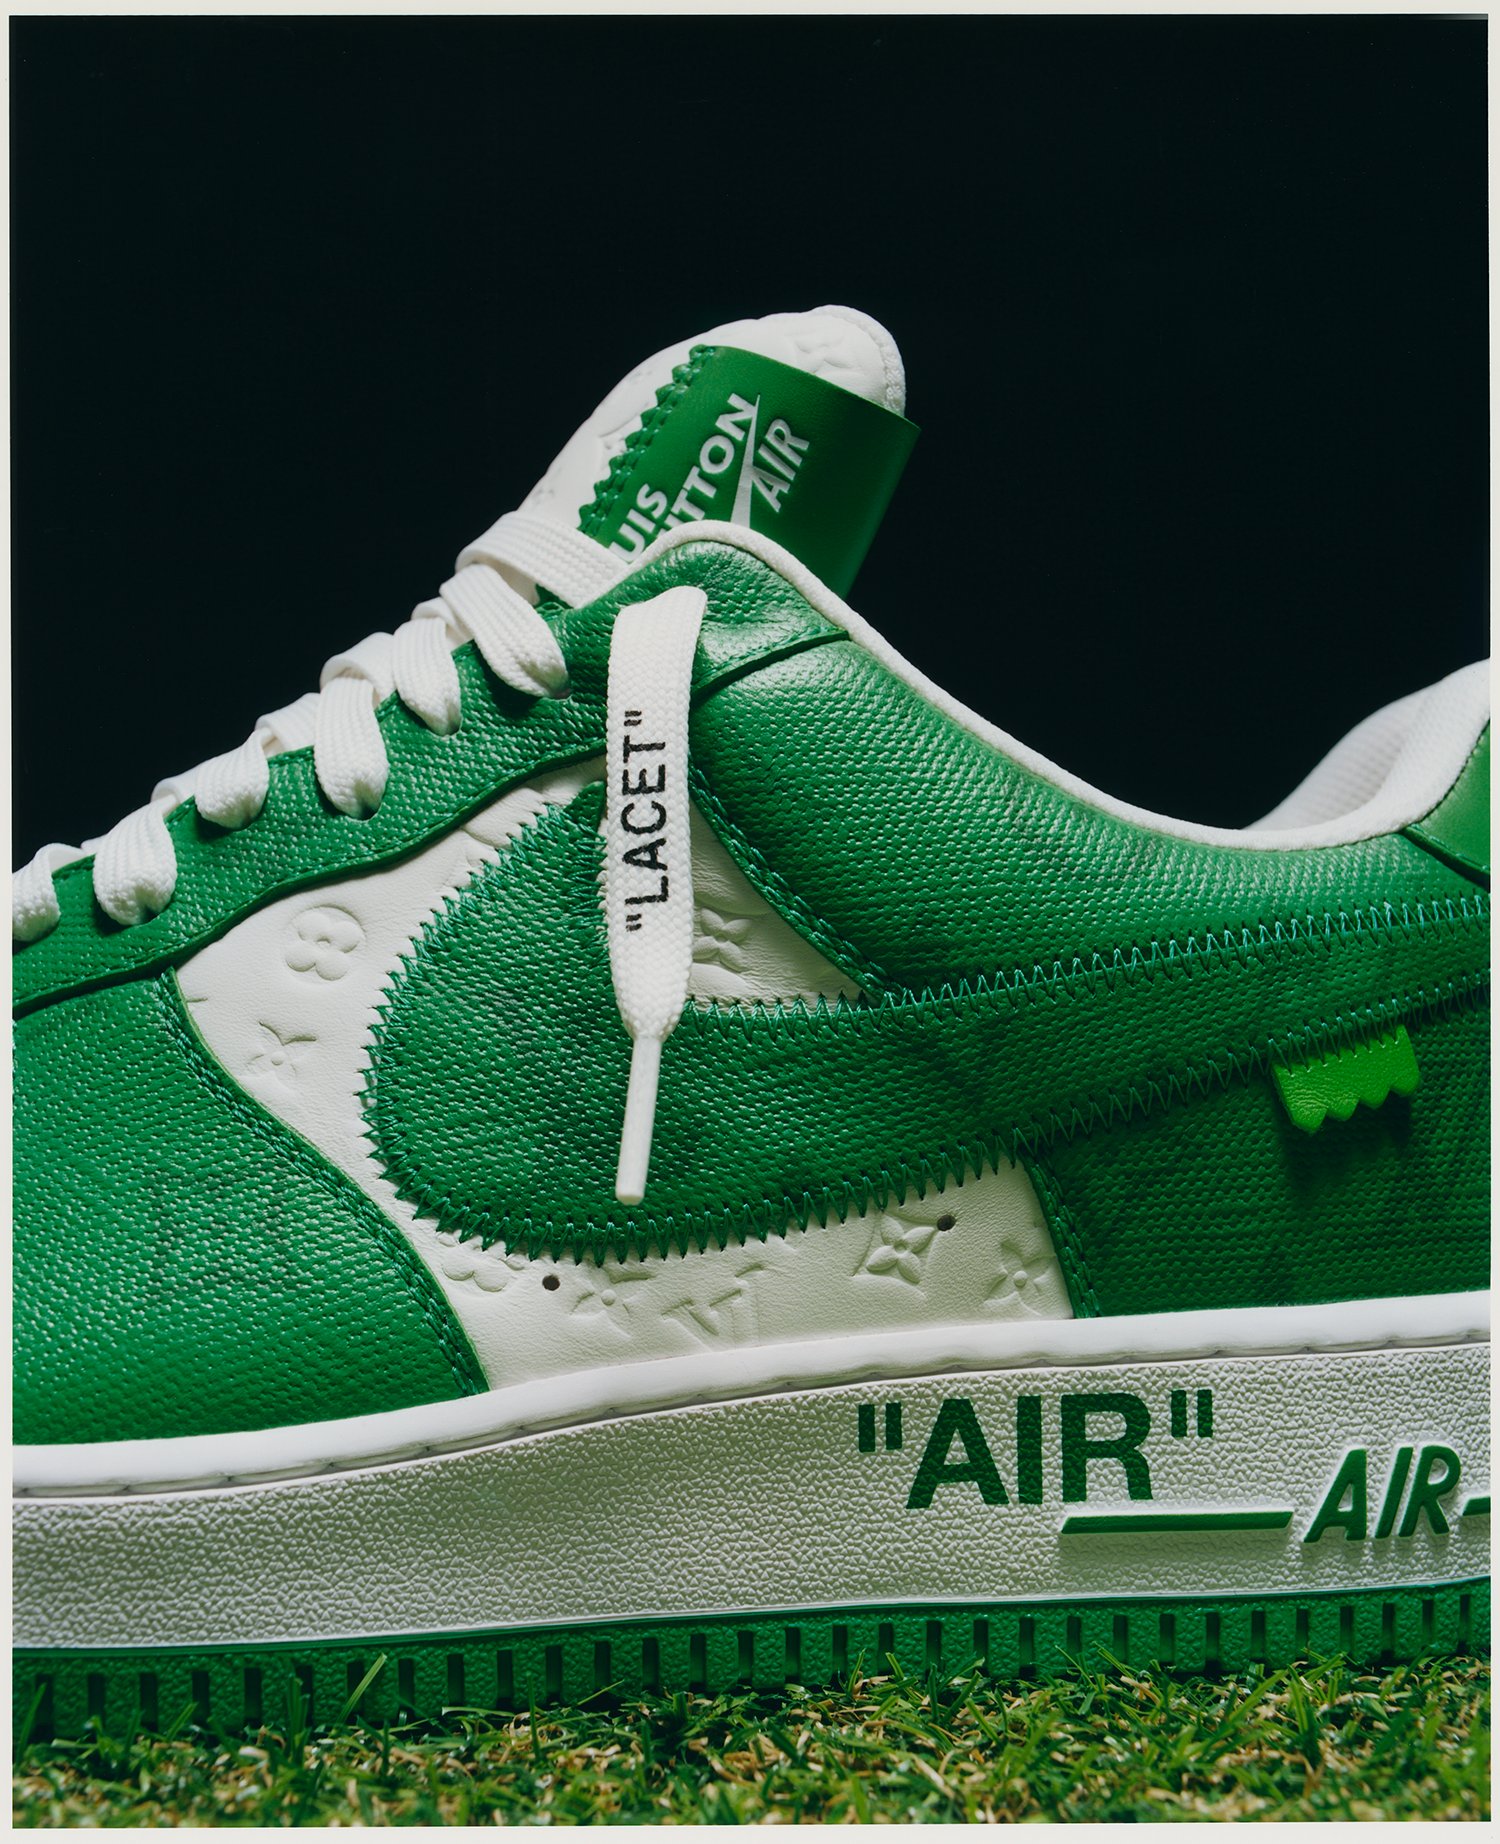 brendandunne on X: Louis Vuitton x Nike Air Force 1s with the